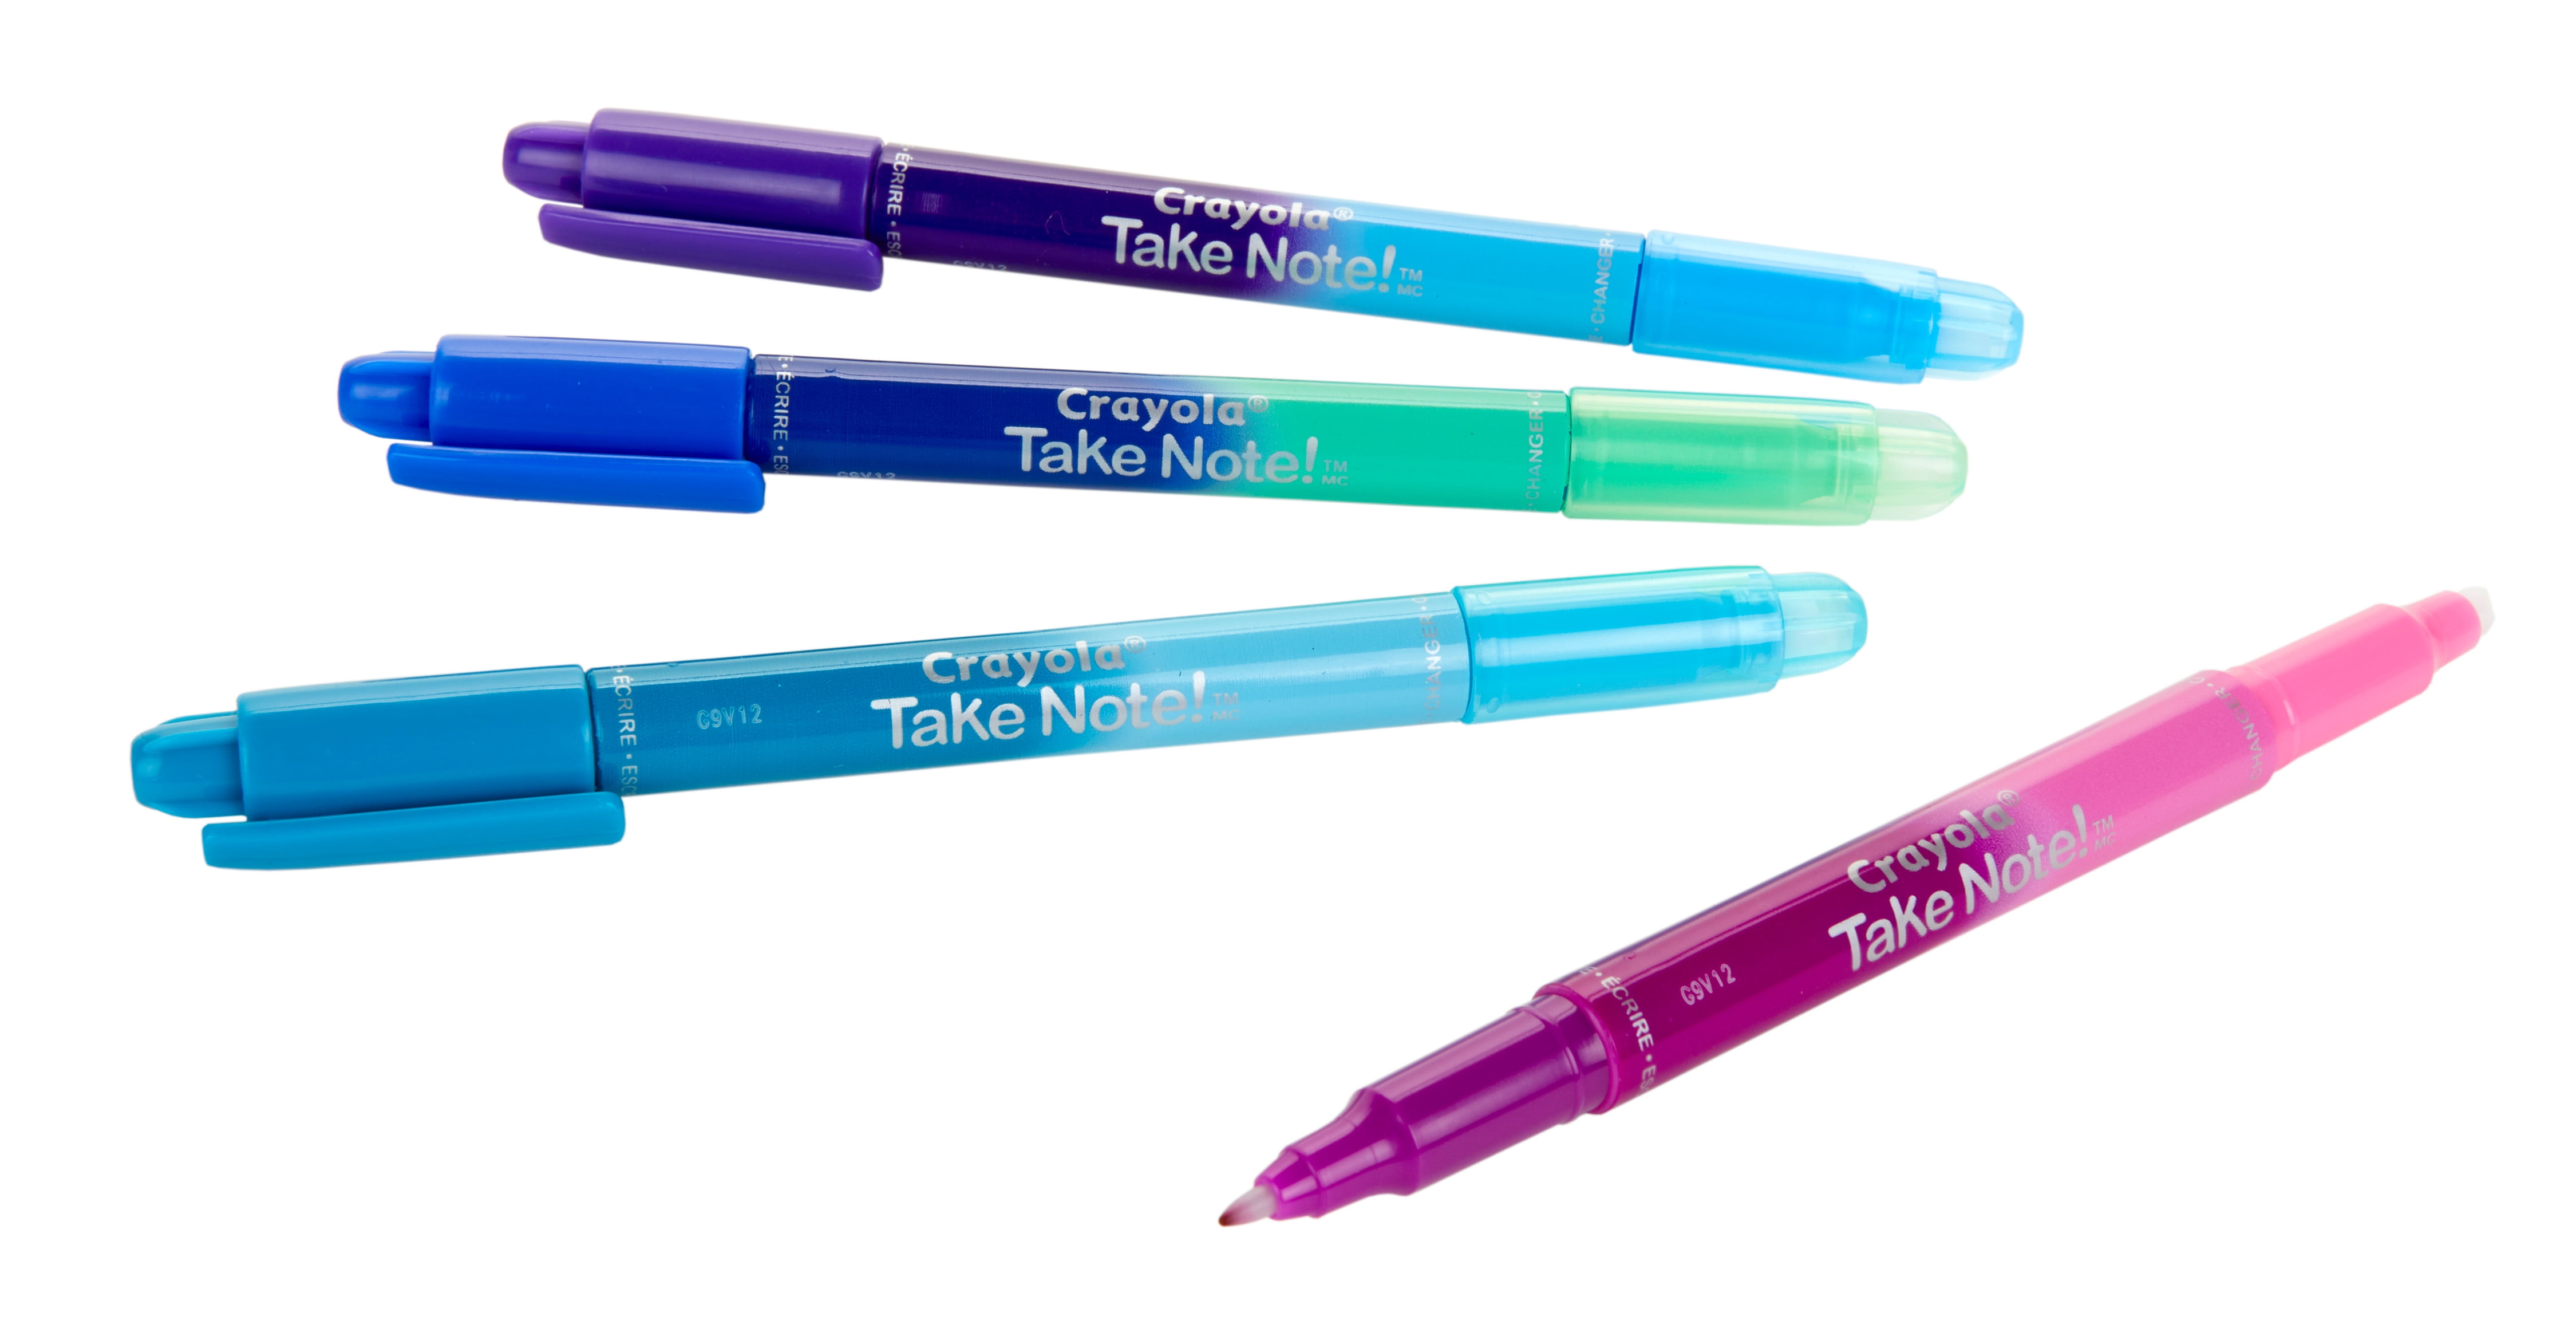 What's New: Crayola Take Note! Collection Makes Student Life Colourful -  Faze Teen